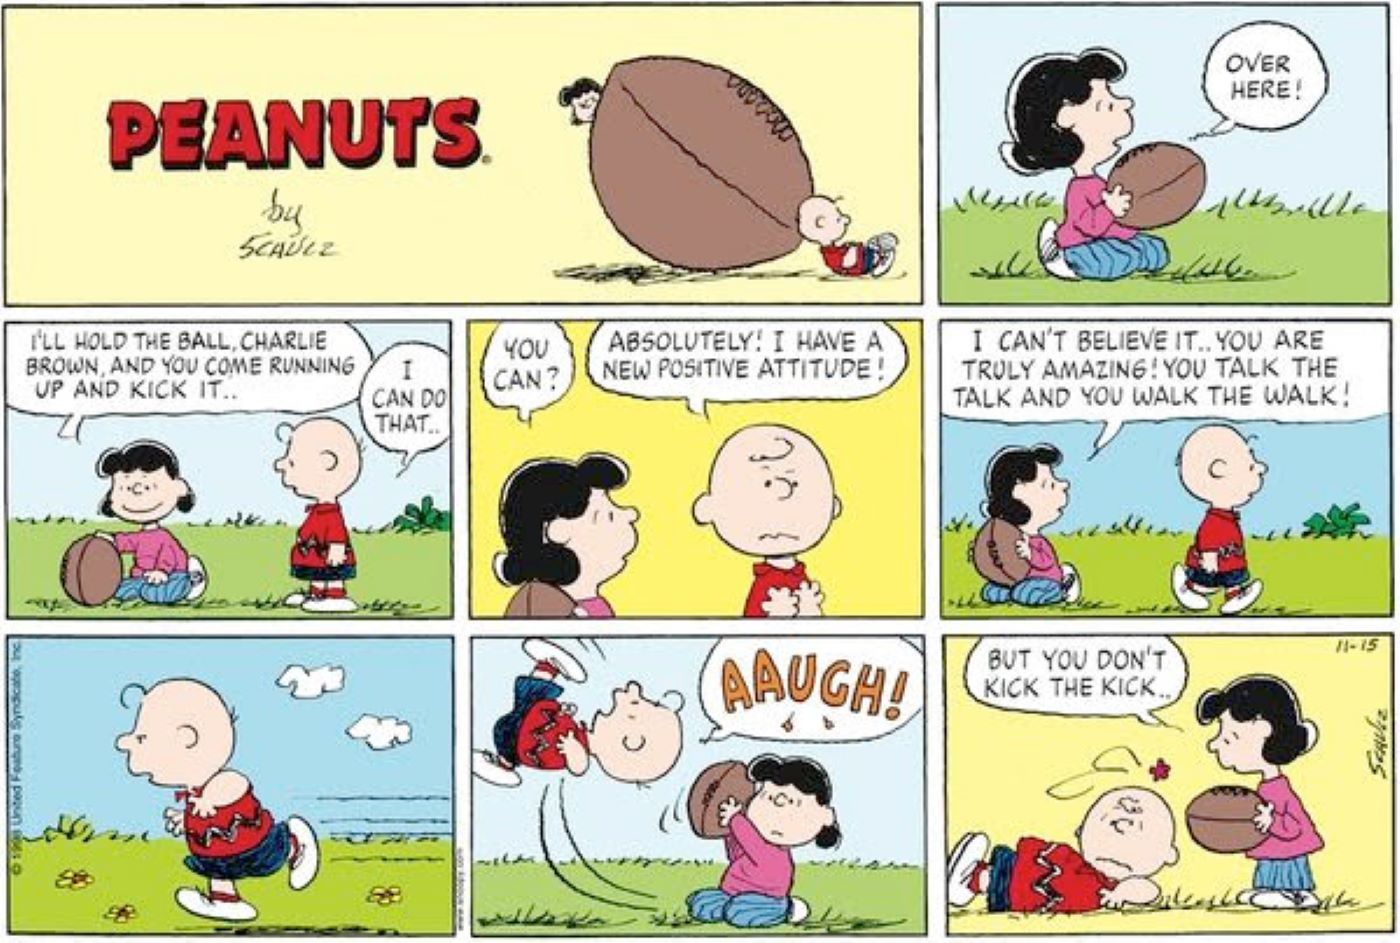 Charlie Brown takes Lucy on in Football